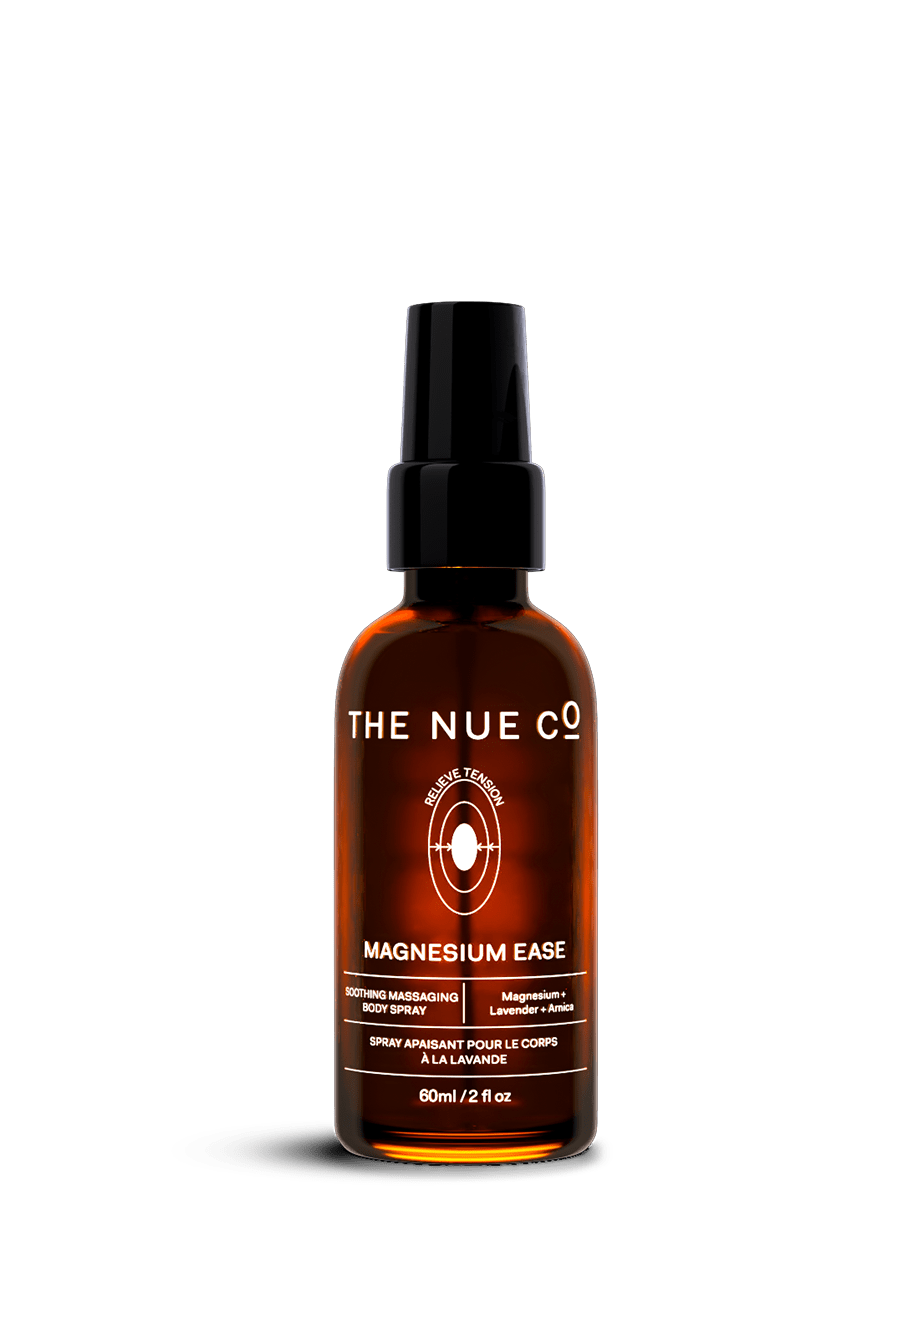 MAGNESIUM EASE Single The Nue Co. 